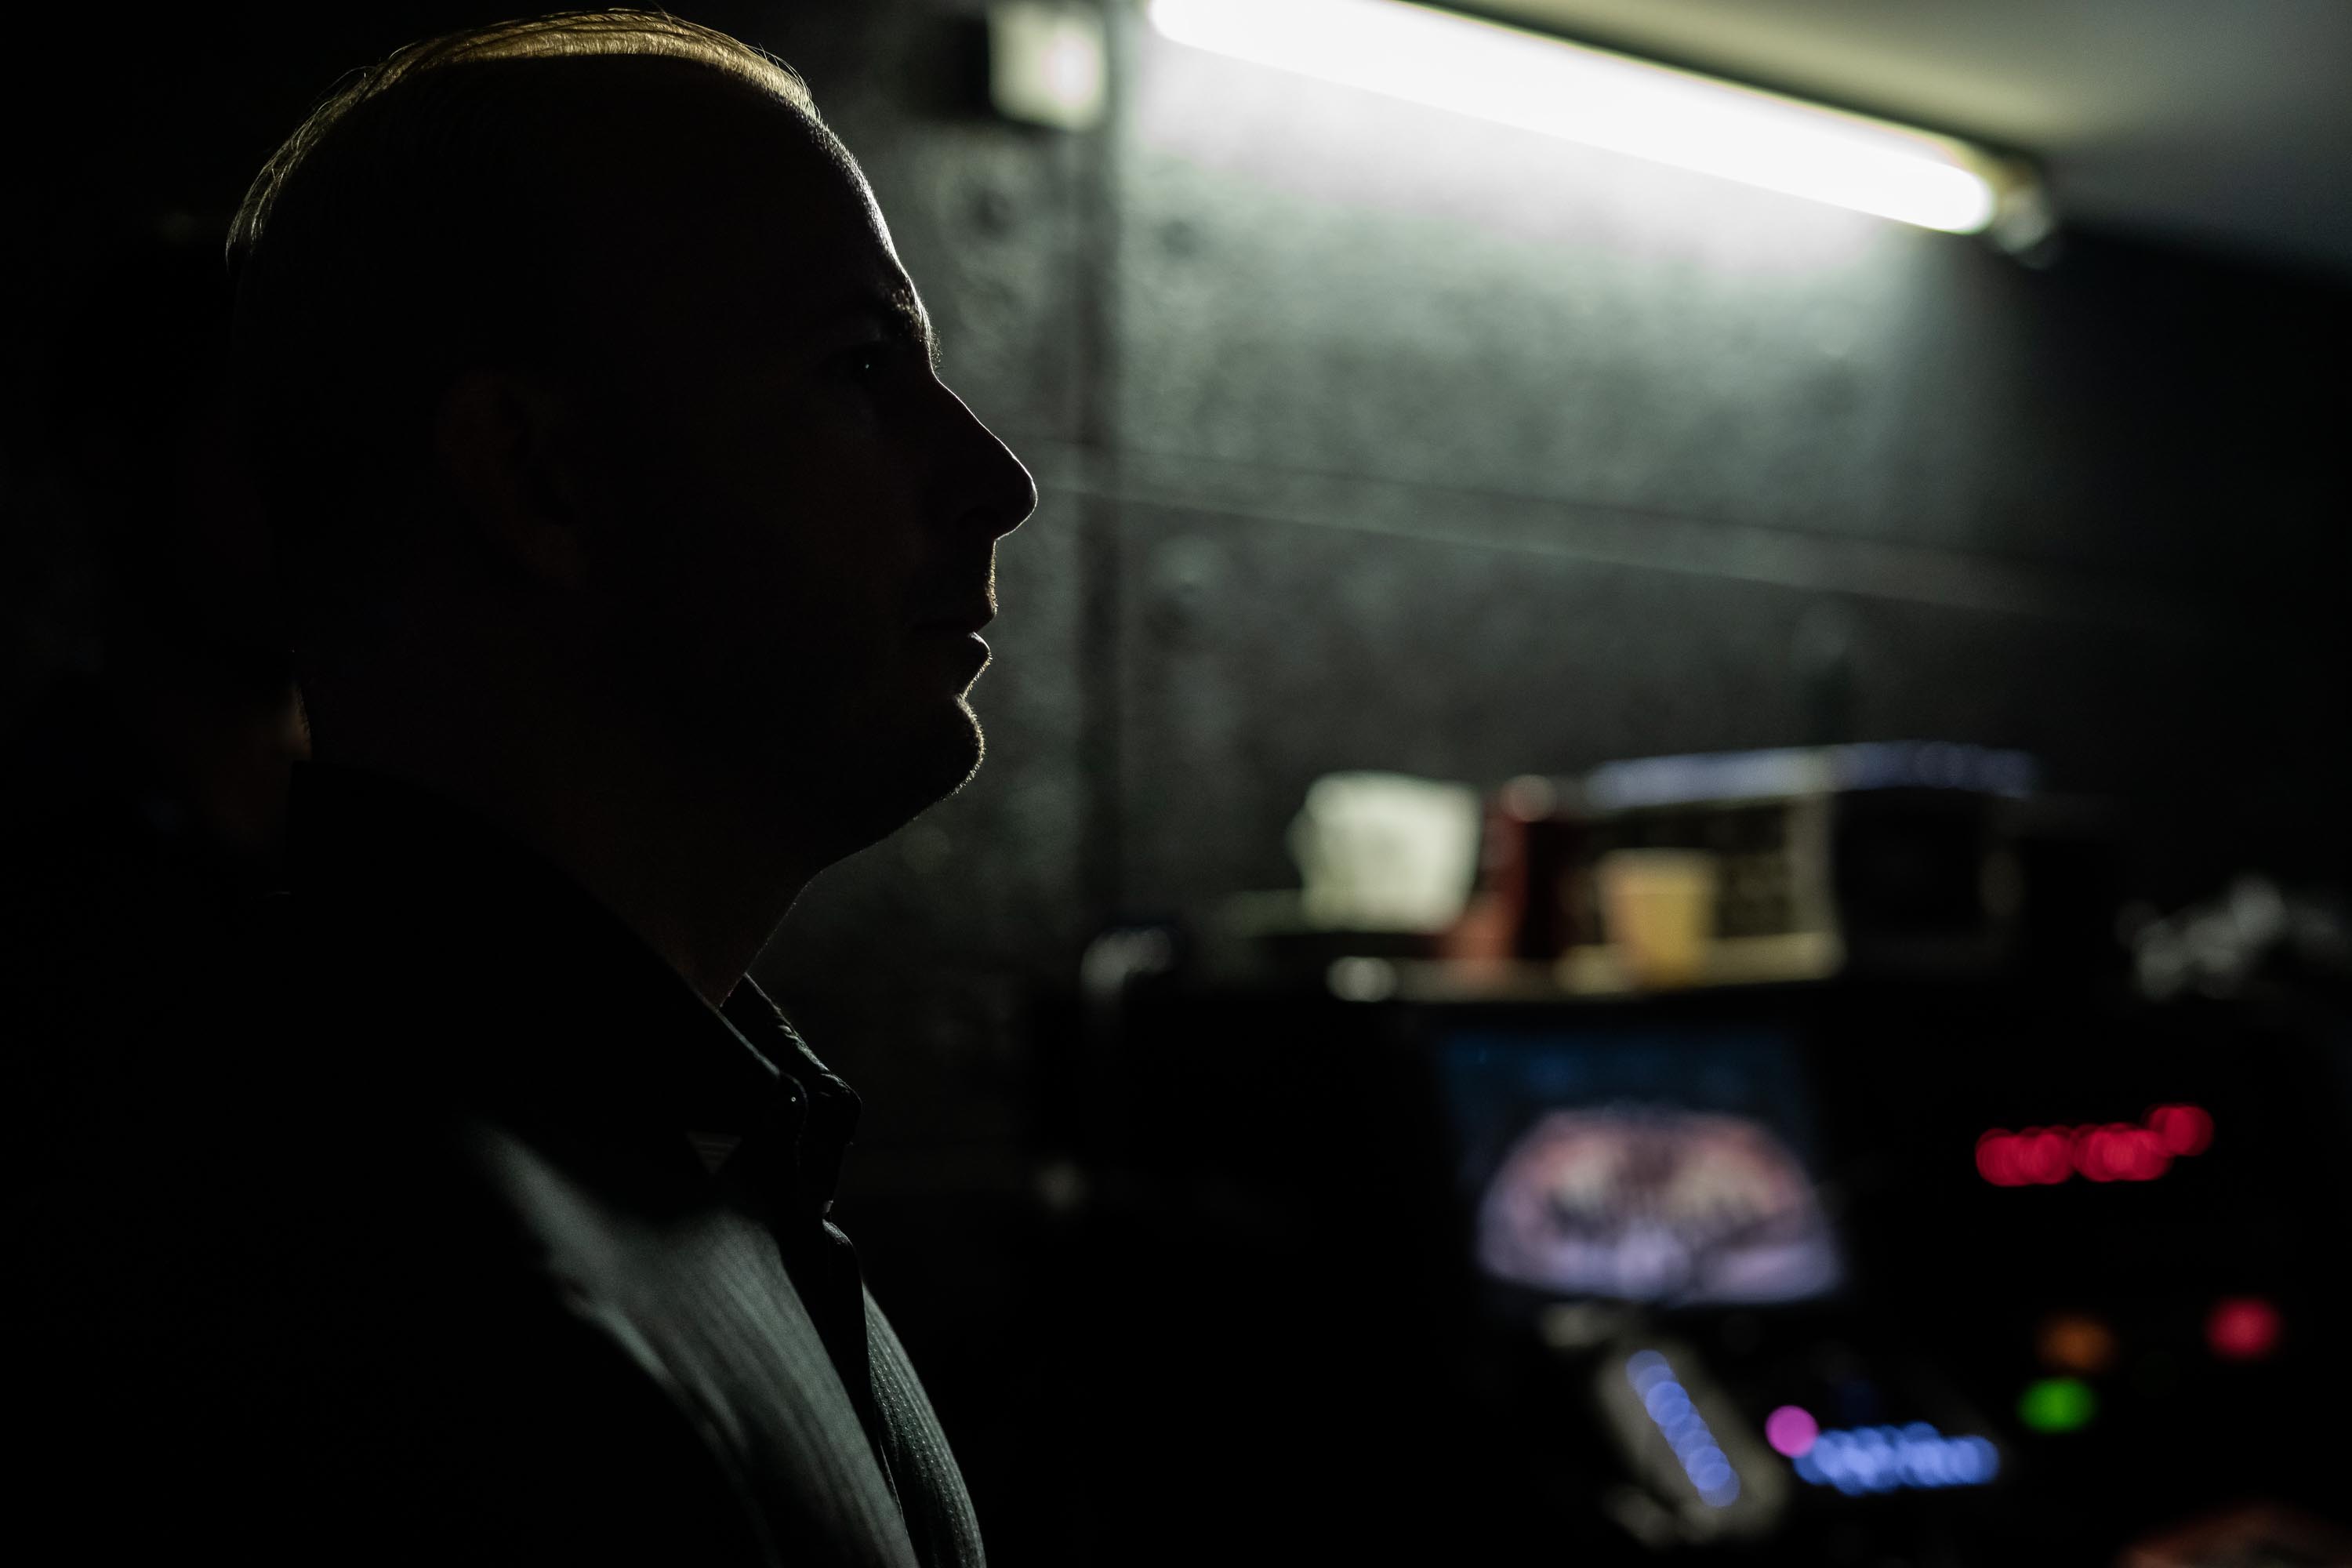 Music Director Yannick Nézet-Séguin in a pensive moment backstage before walking onto the stage